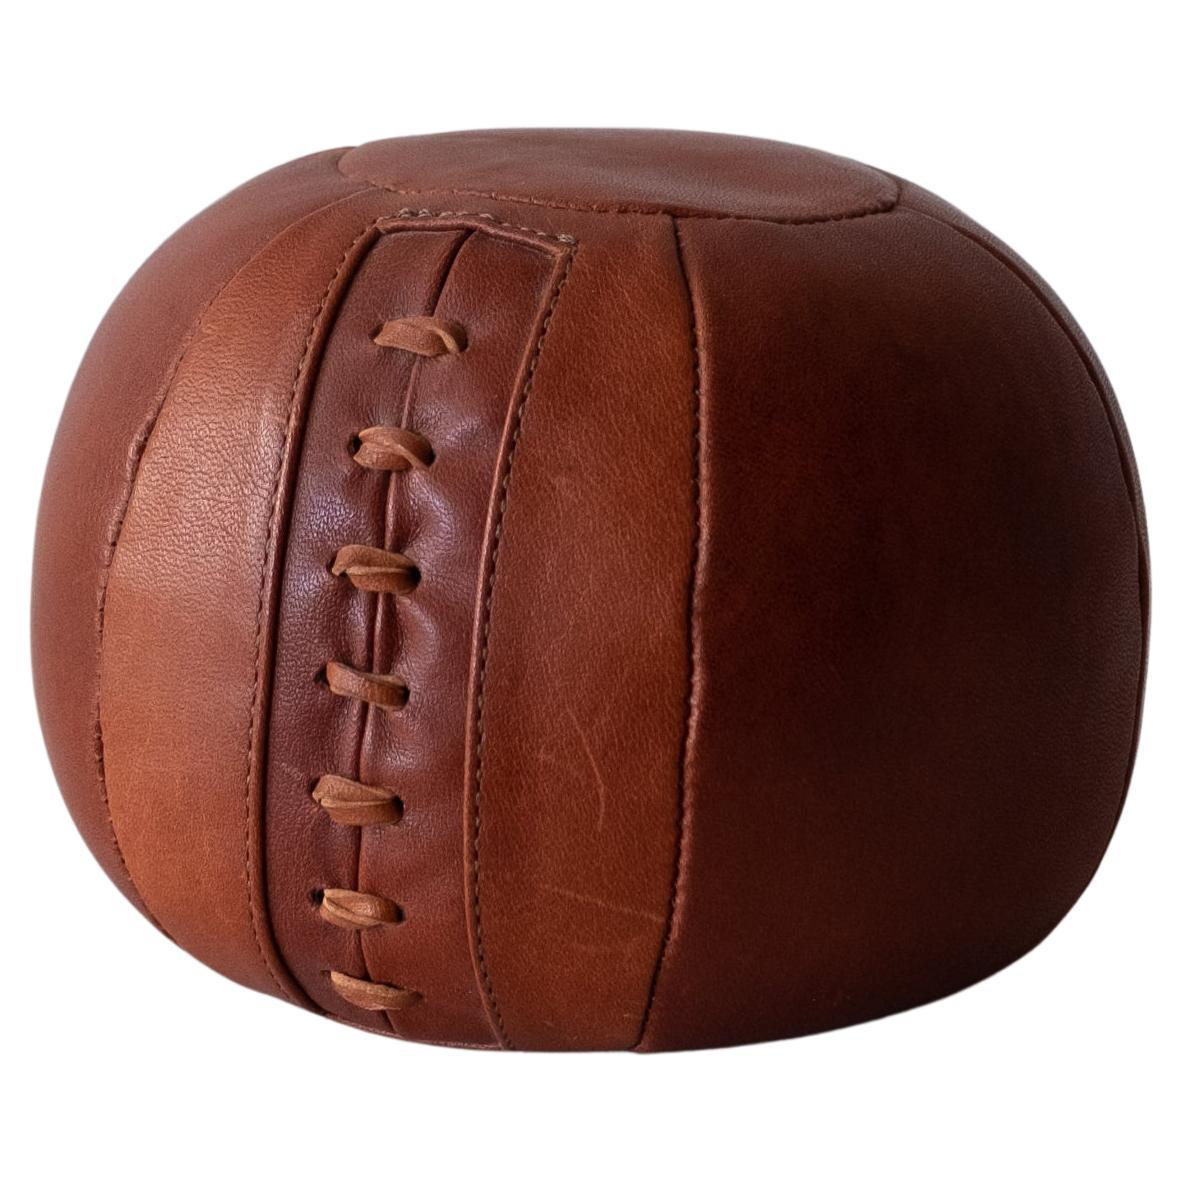 Cognac Leather Medicine Ball Paperweight For Sale